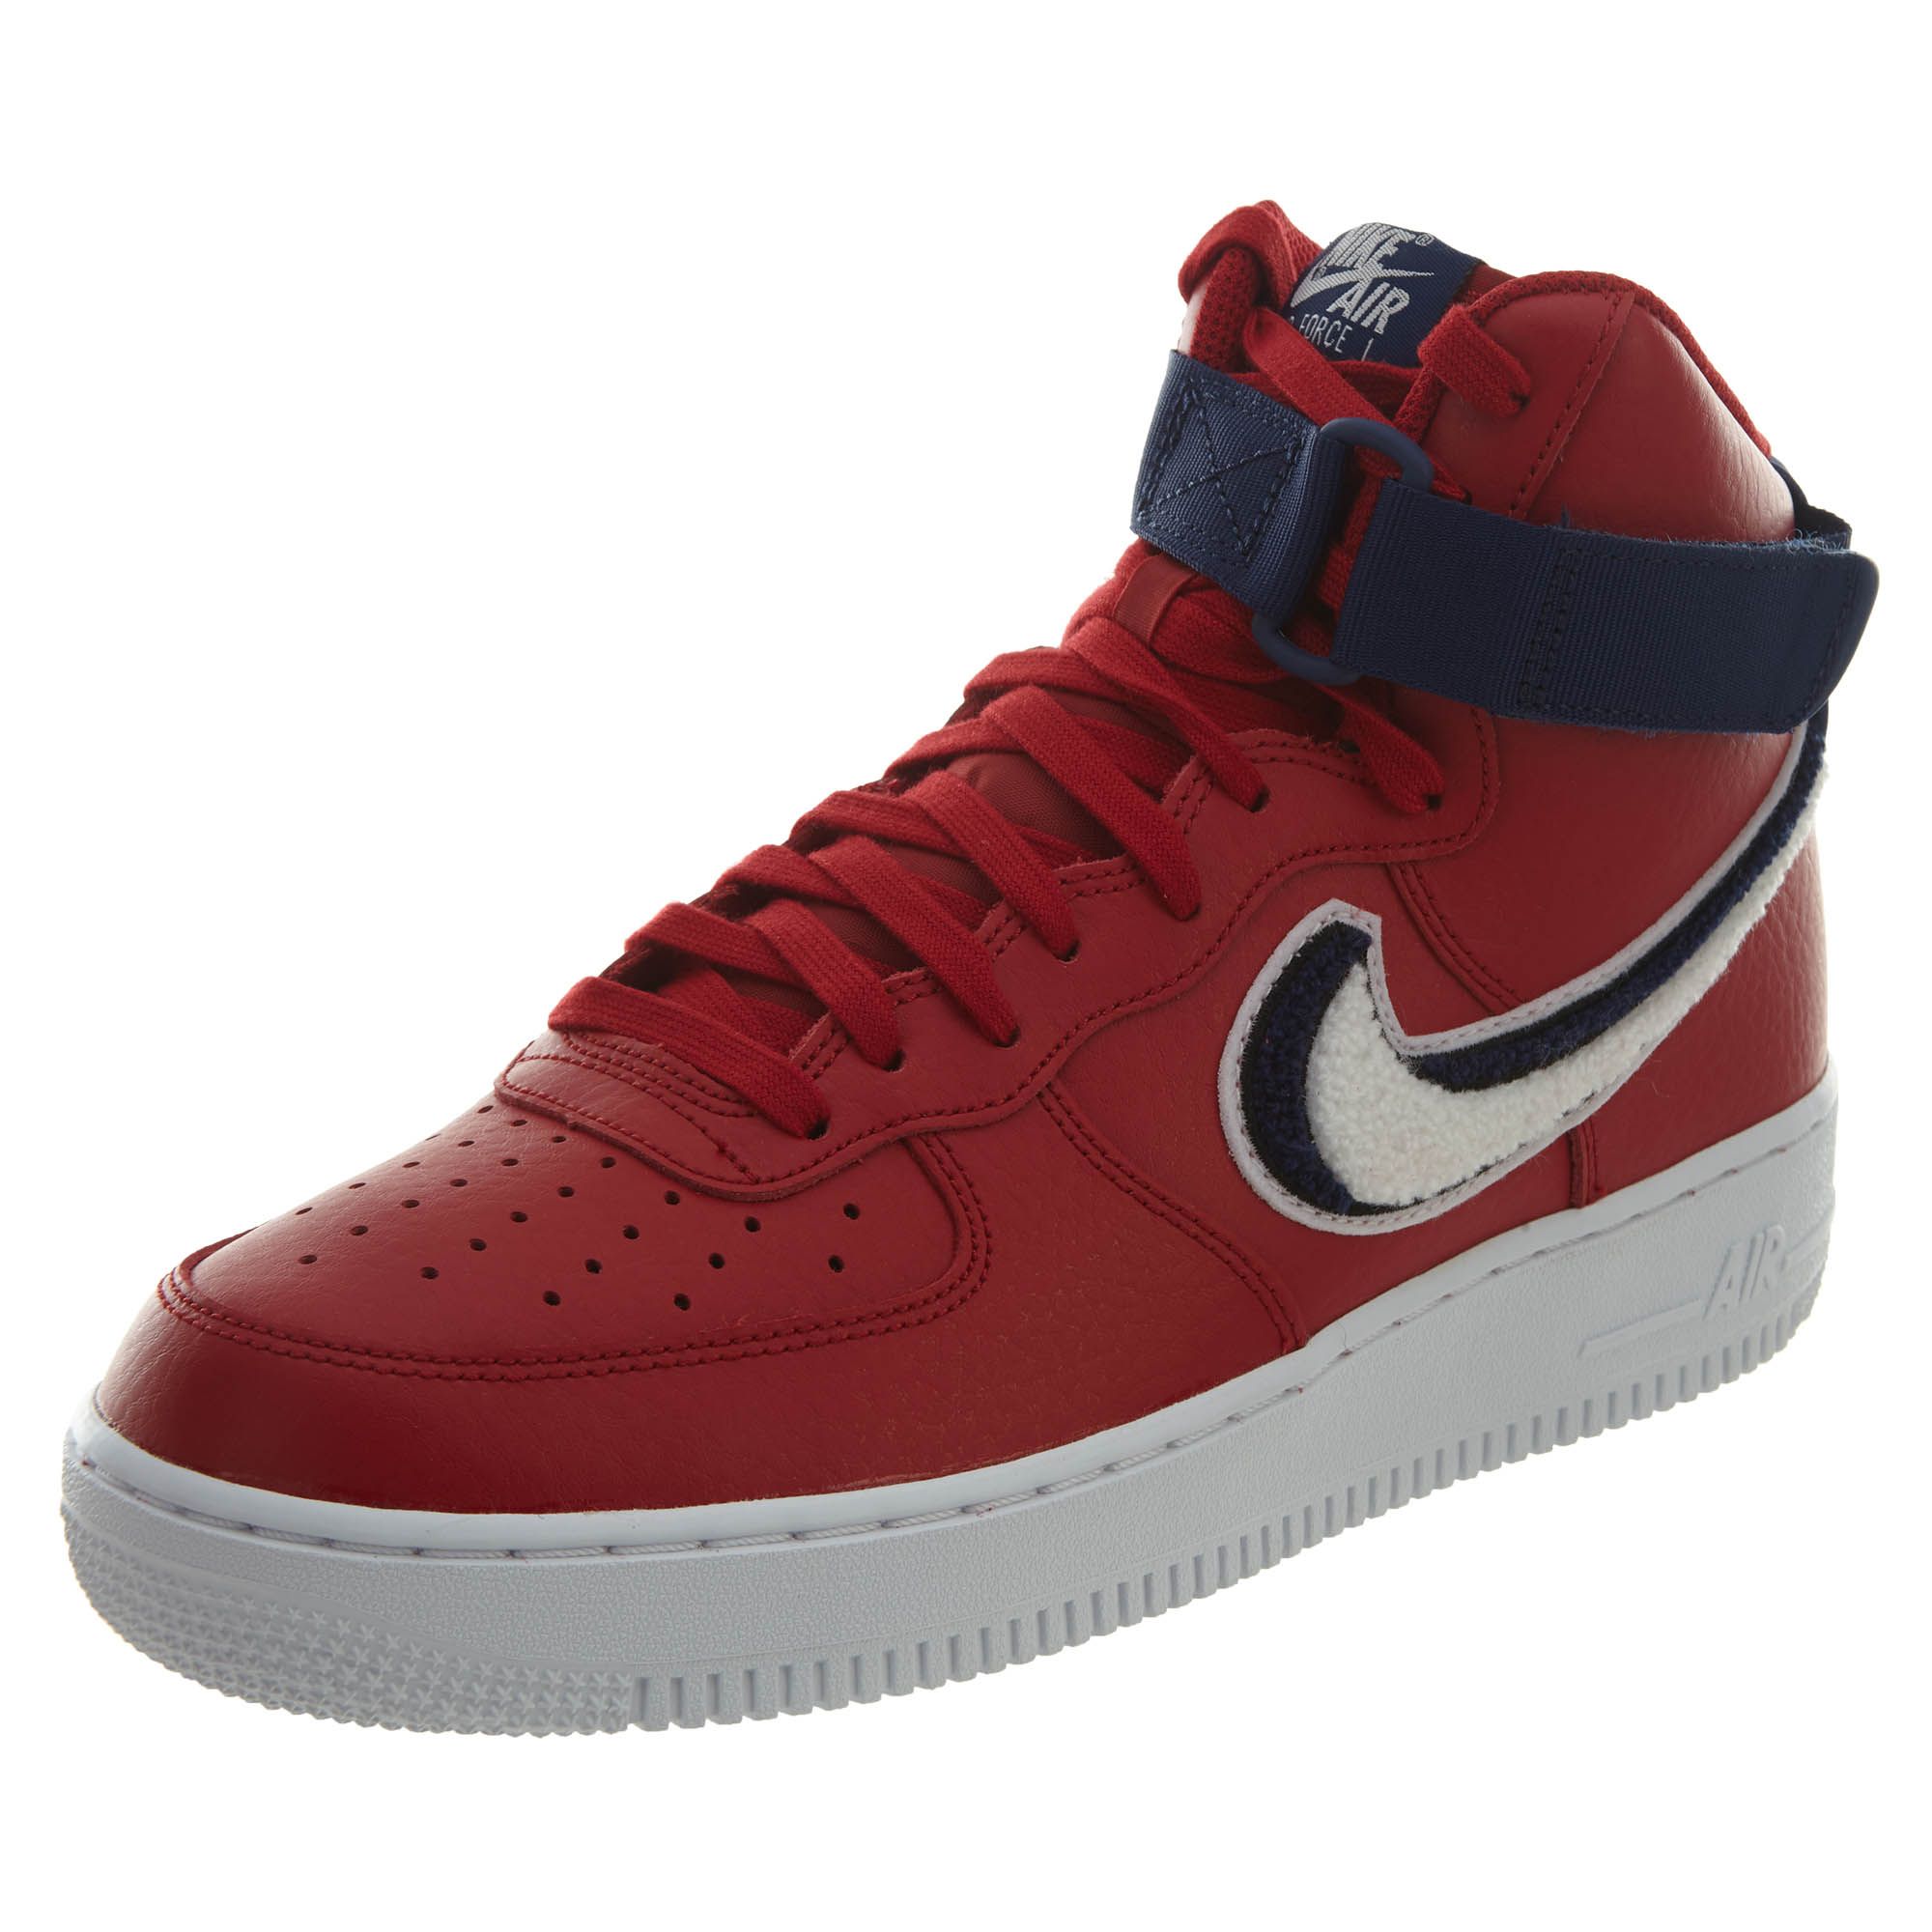 white air forces with red and blue